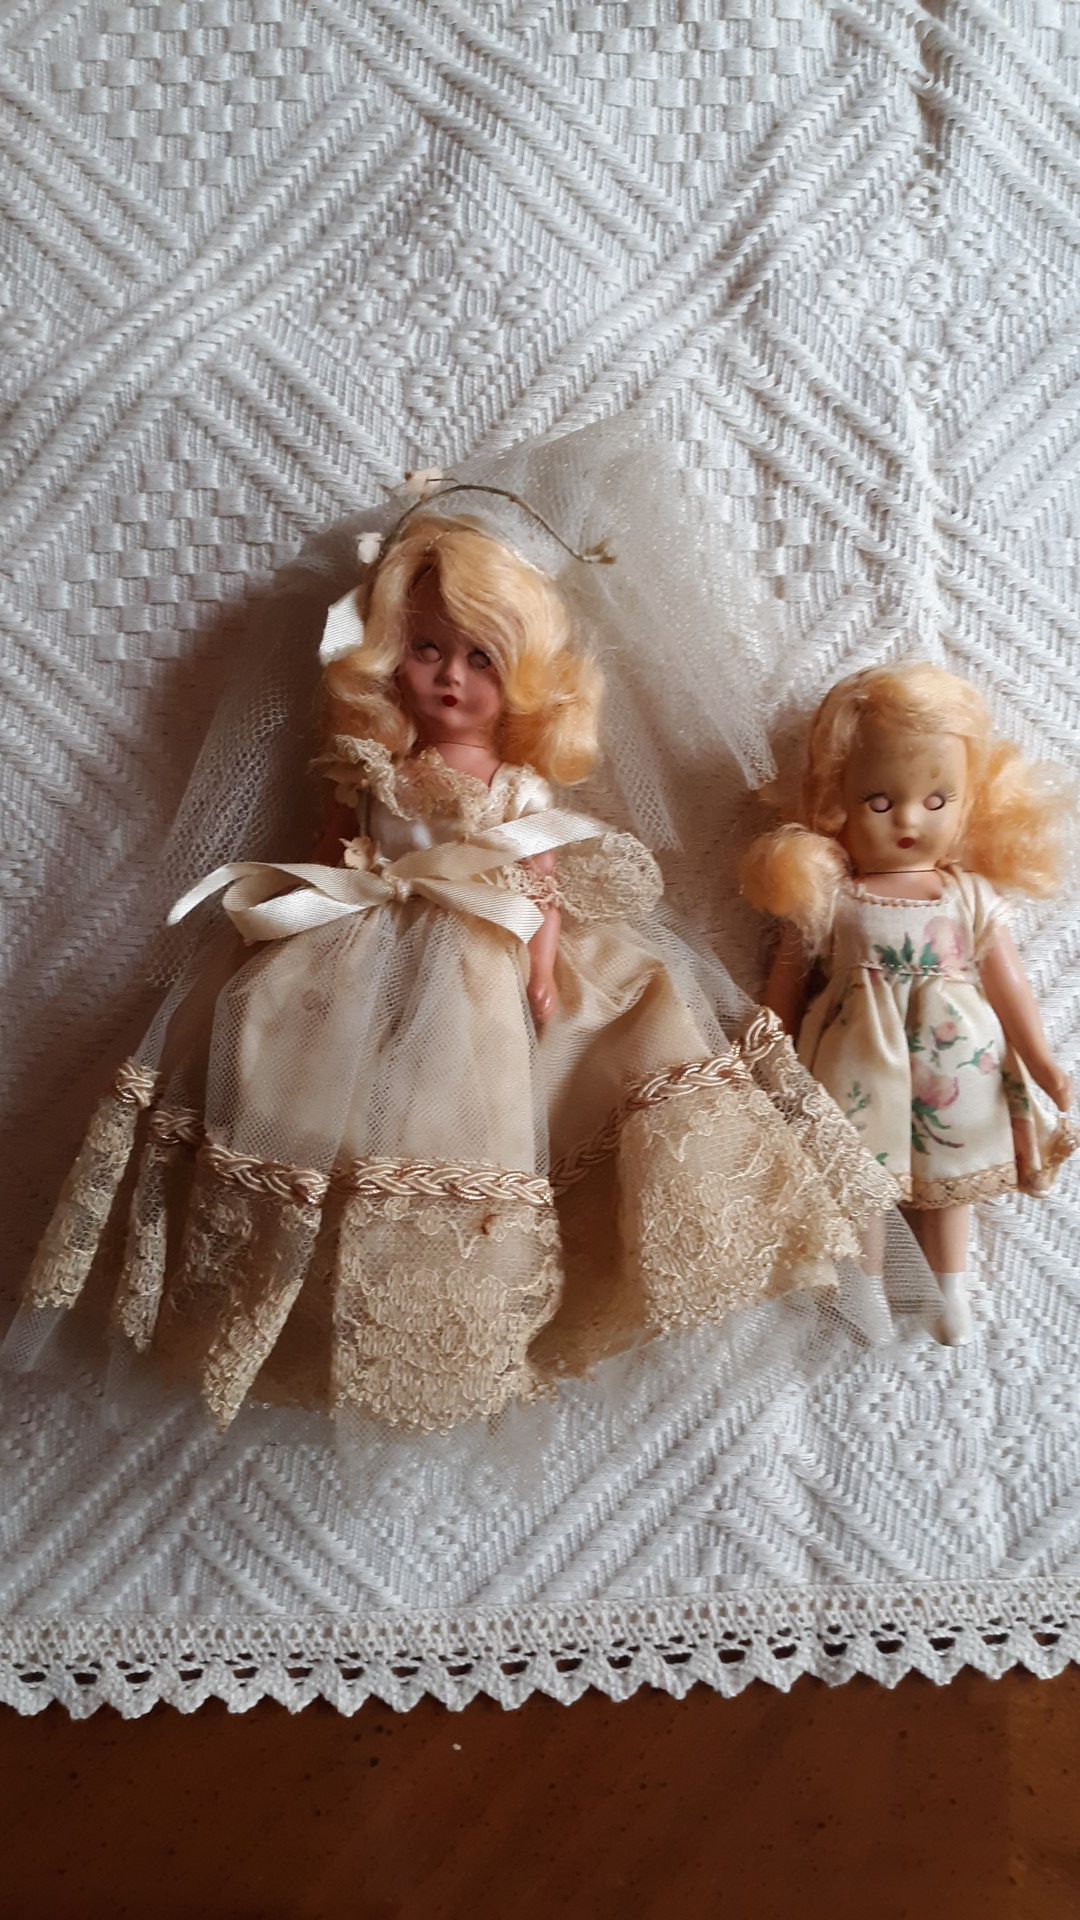 Two Antique dolls